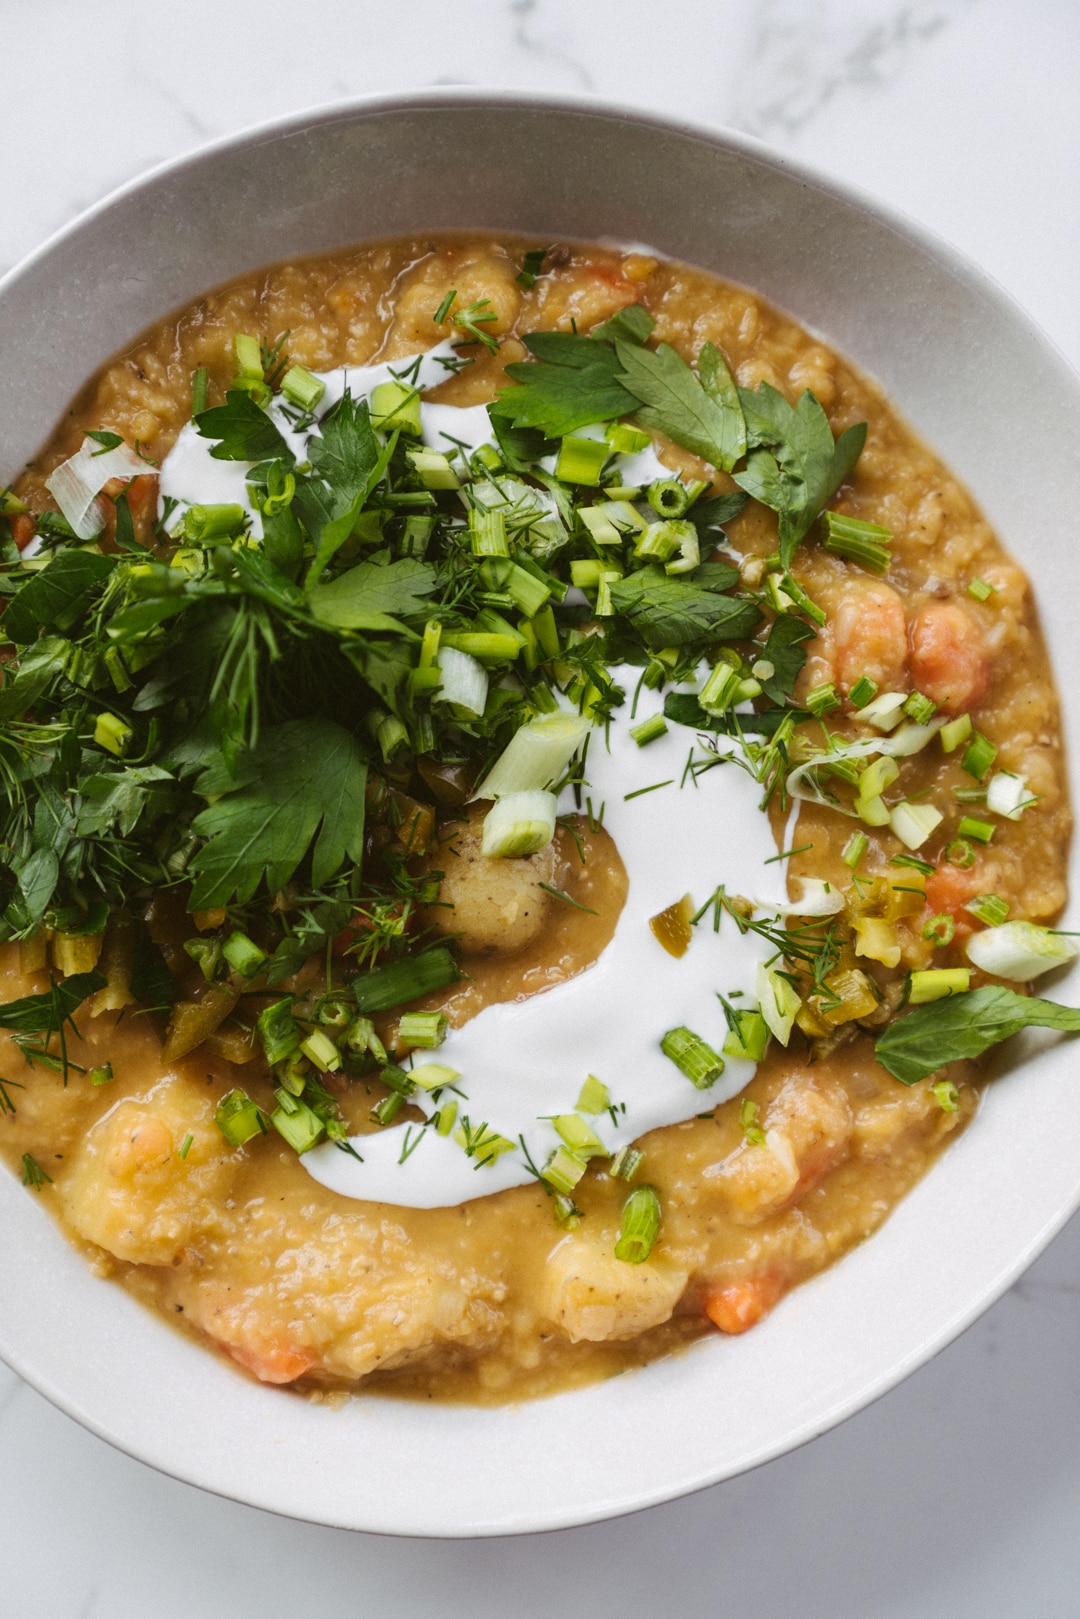 Warming Red Lentil, Potato And Carrot Stew With Fresh Herbs